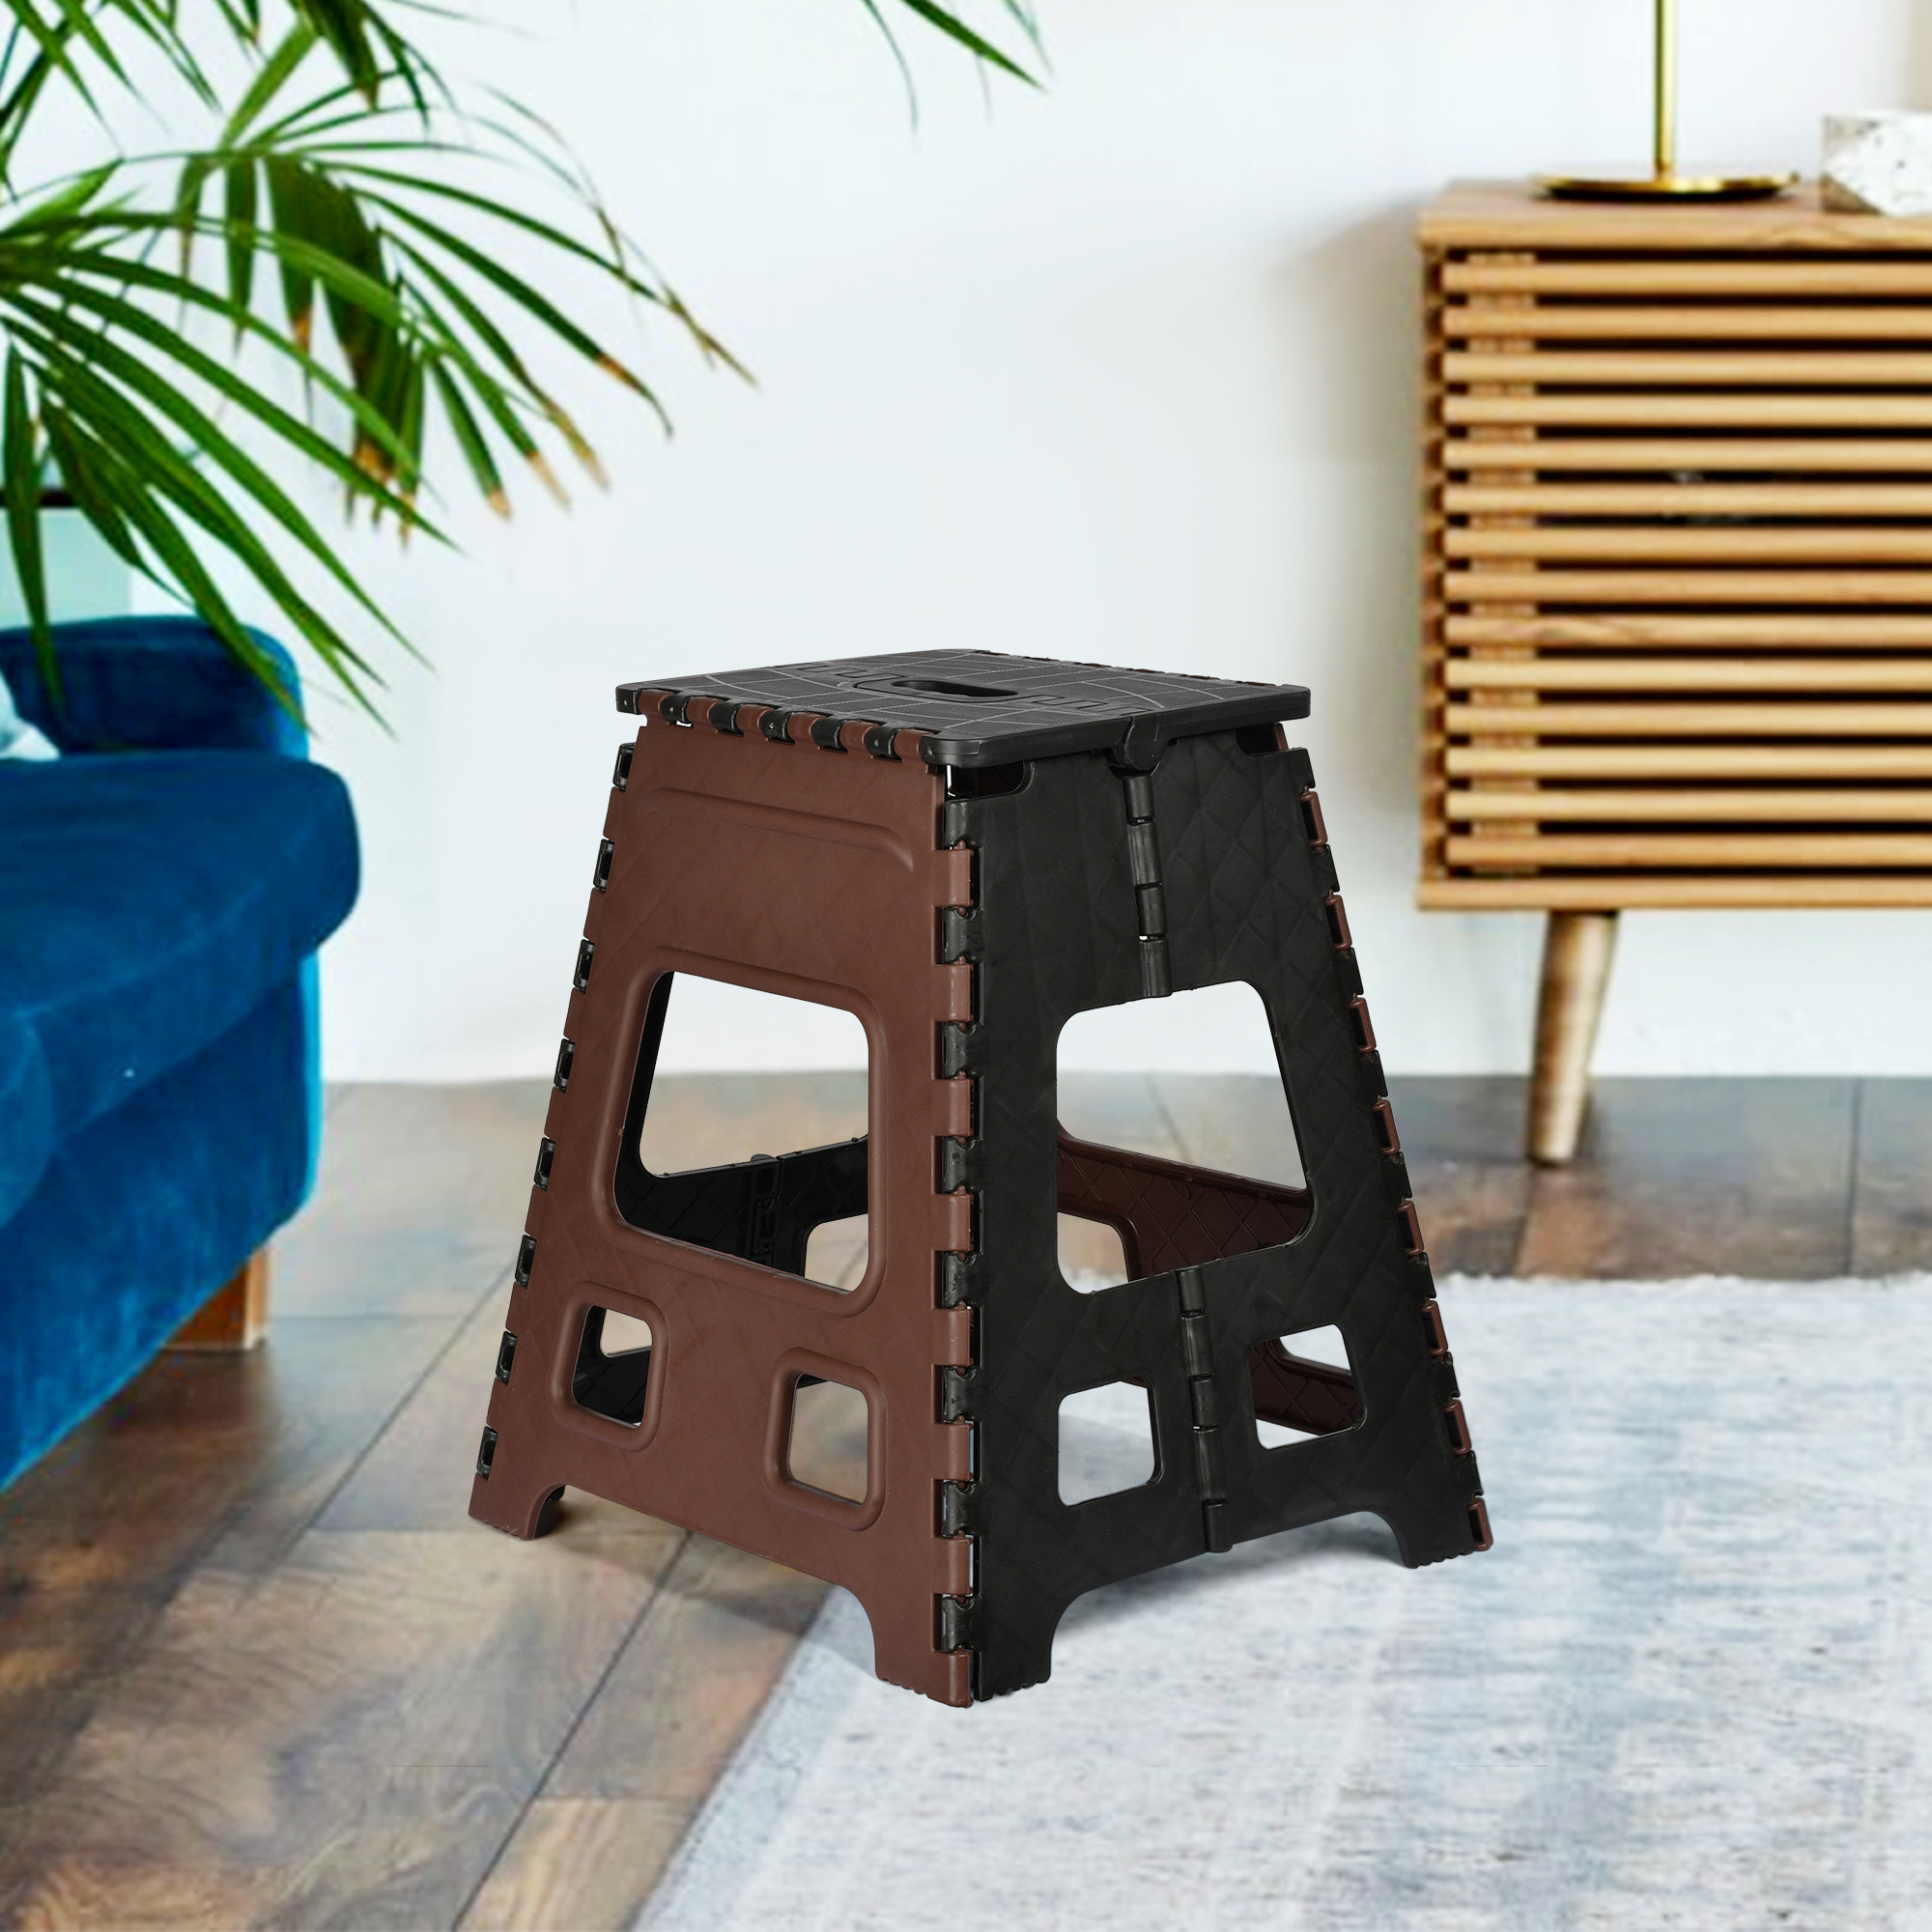 Kuber Industries Pack of 2 Stool | Portable & Foldable Stool | Collapsible Camping Chair | Stool for Outdoor-Fishing-Hiking-Garden-Travel | Multipurpose Sitting Stool | Large-Small | Brown & Black